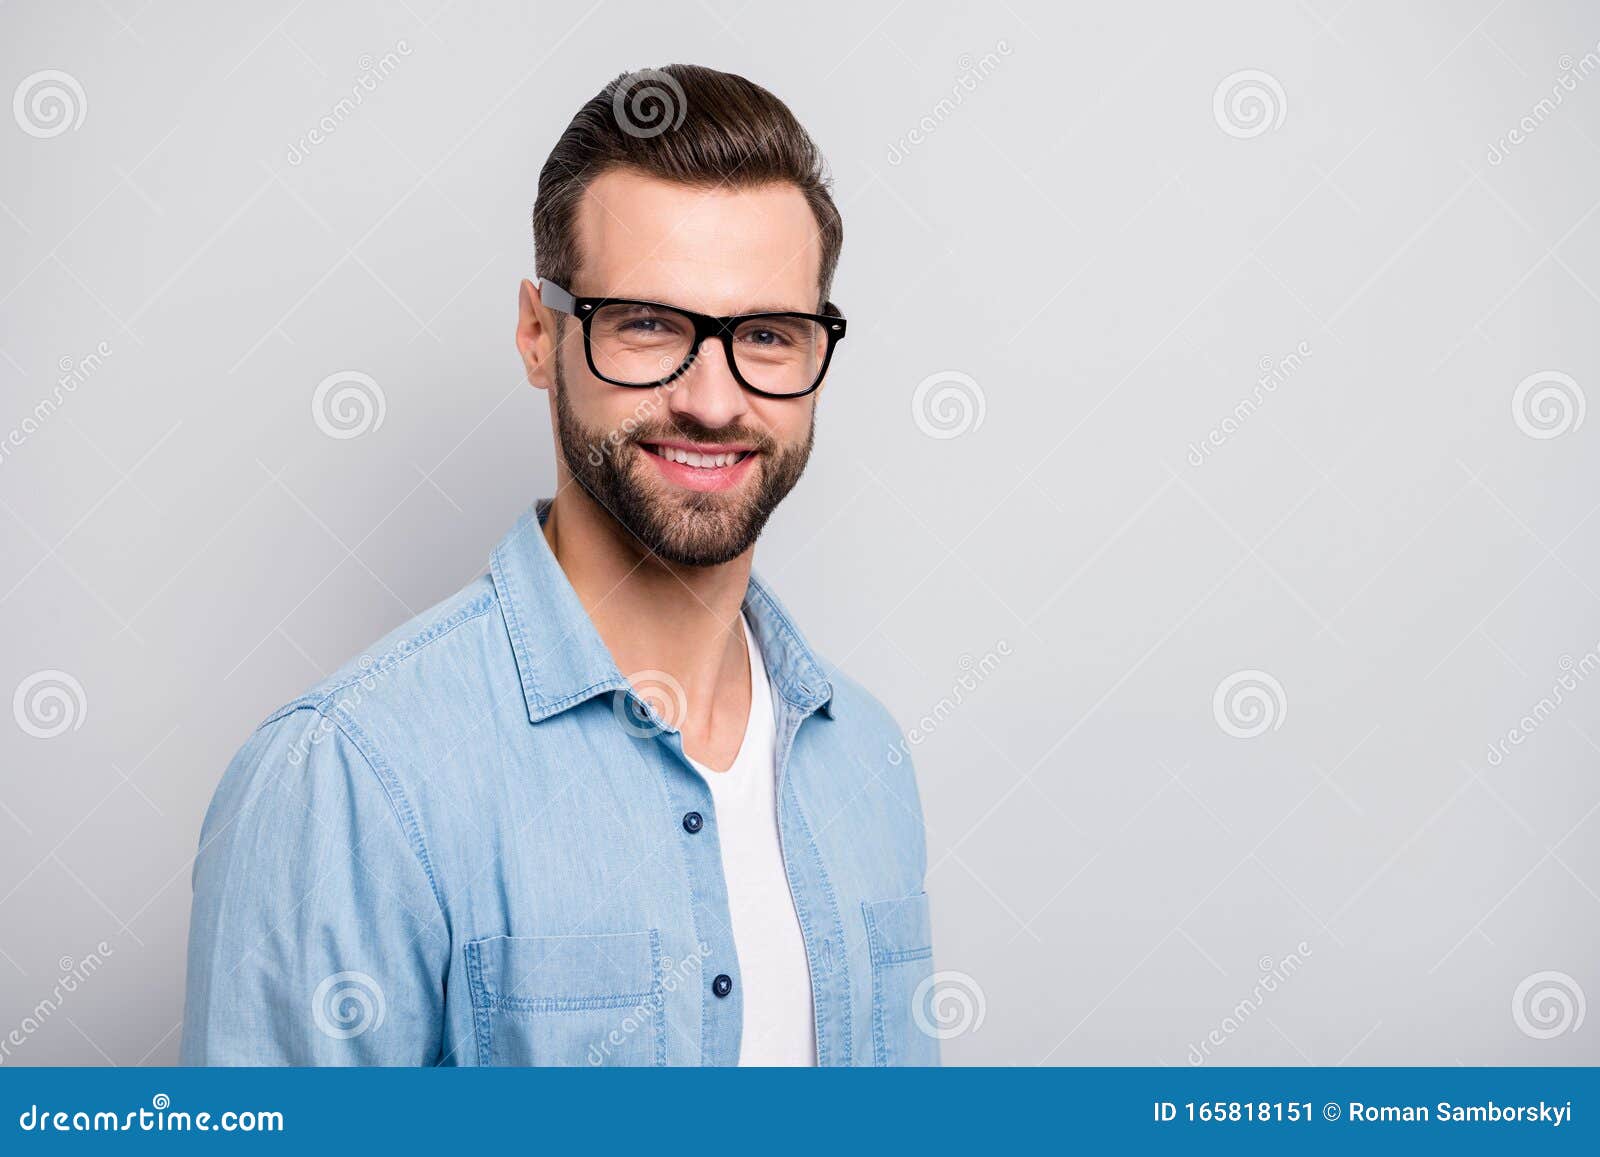 closeup photo of amazing macho guy friendly smiling colleagues partners young promoted chief wear specs casual denim